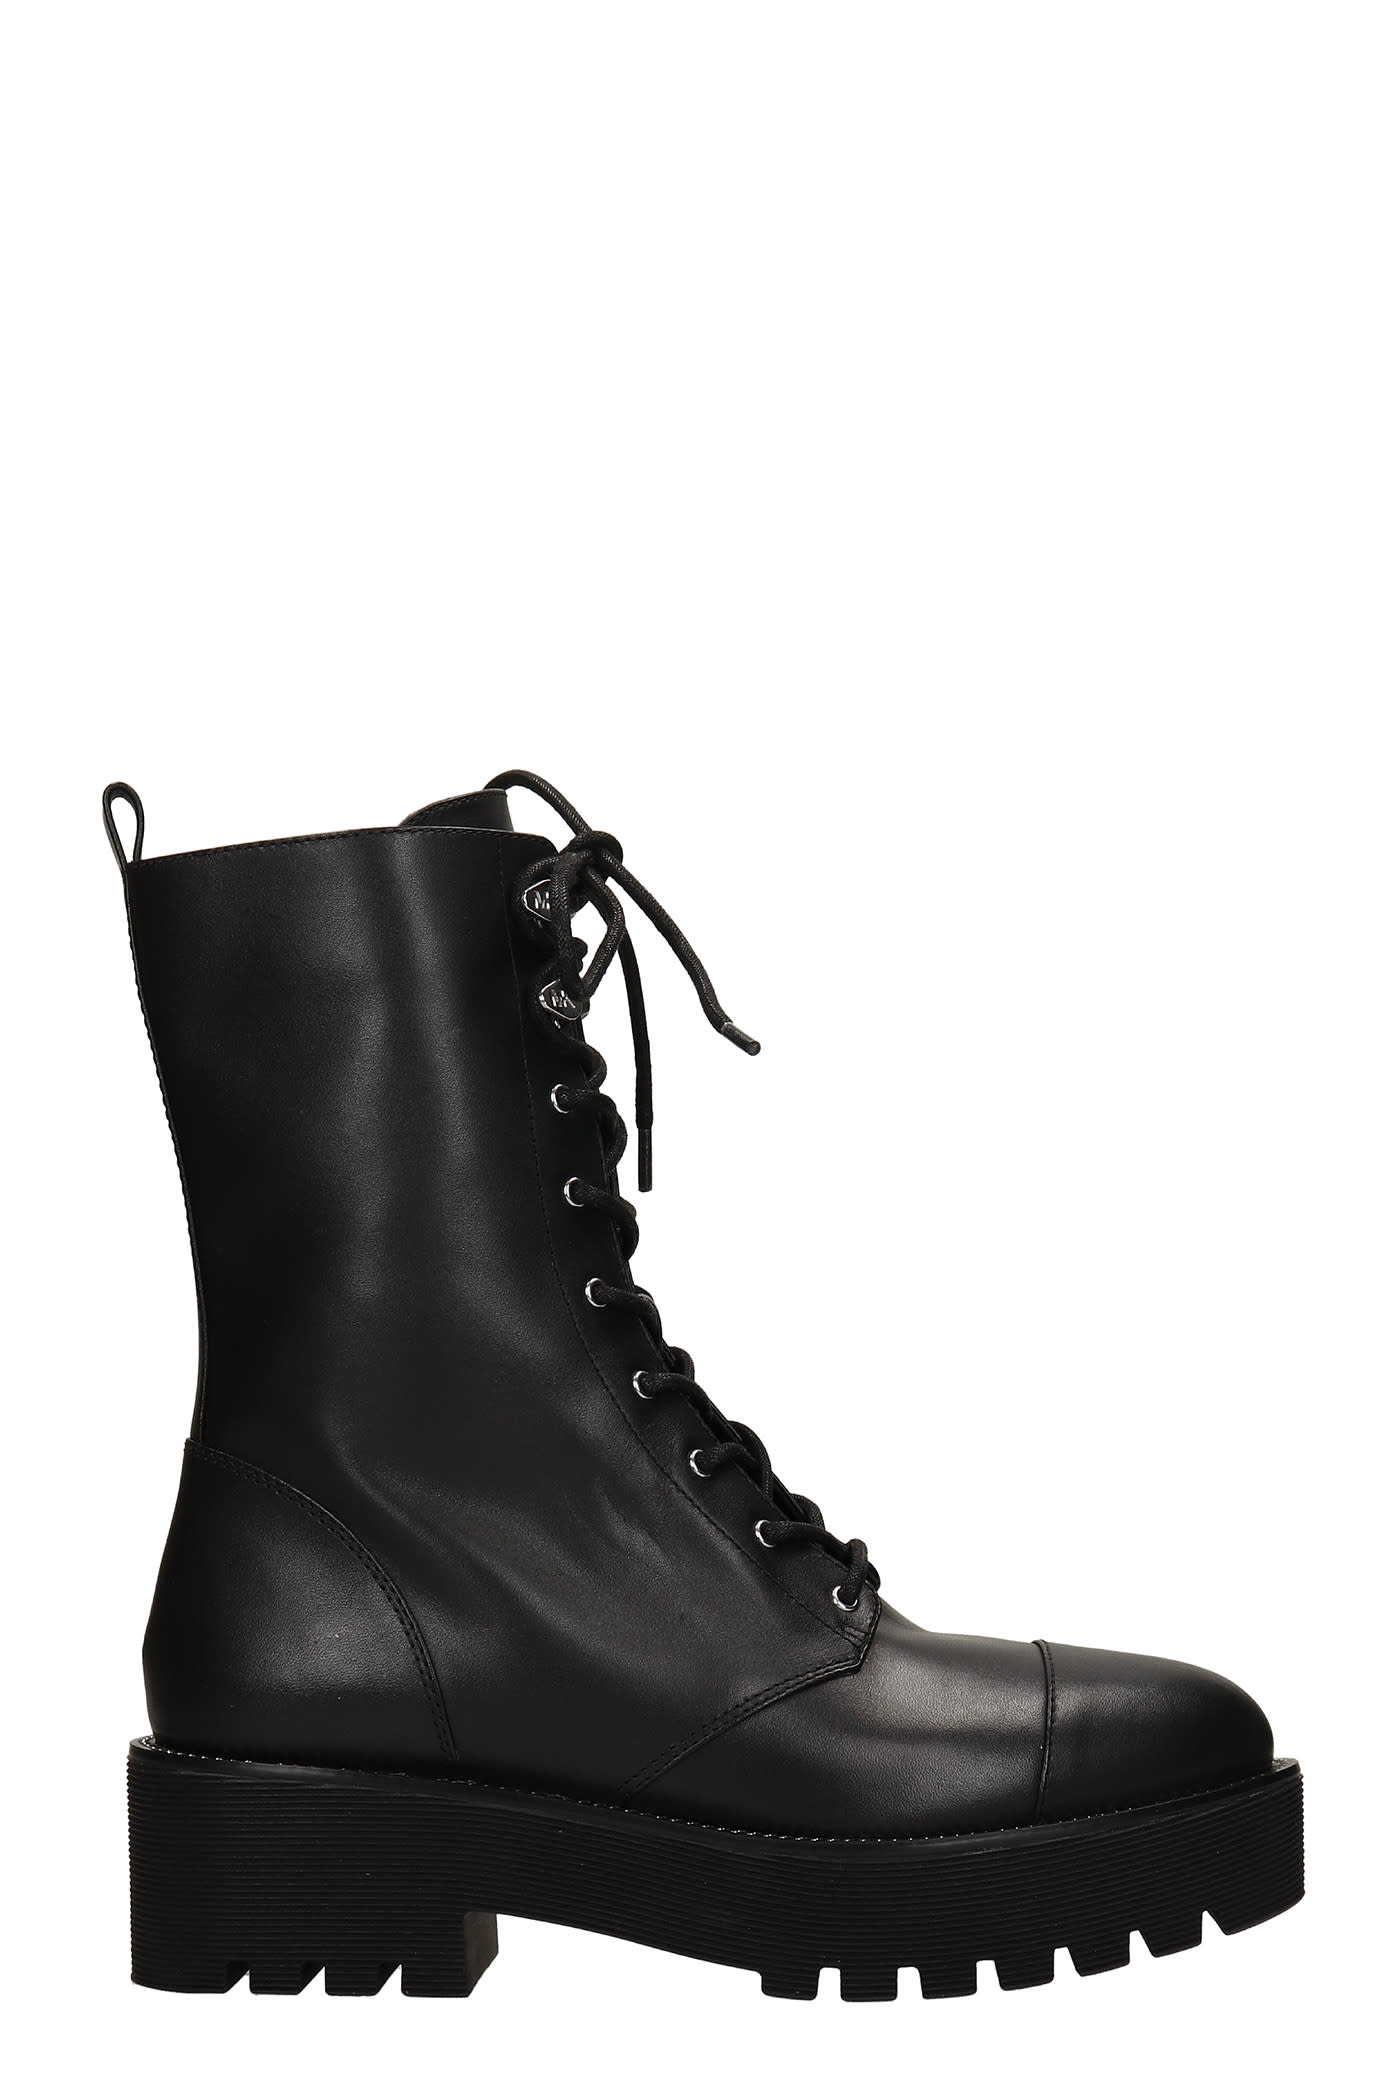 Michael Kors Bryce Combat Boots In Black Leather